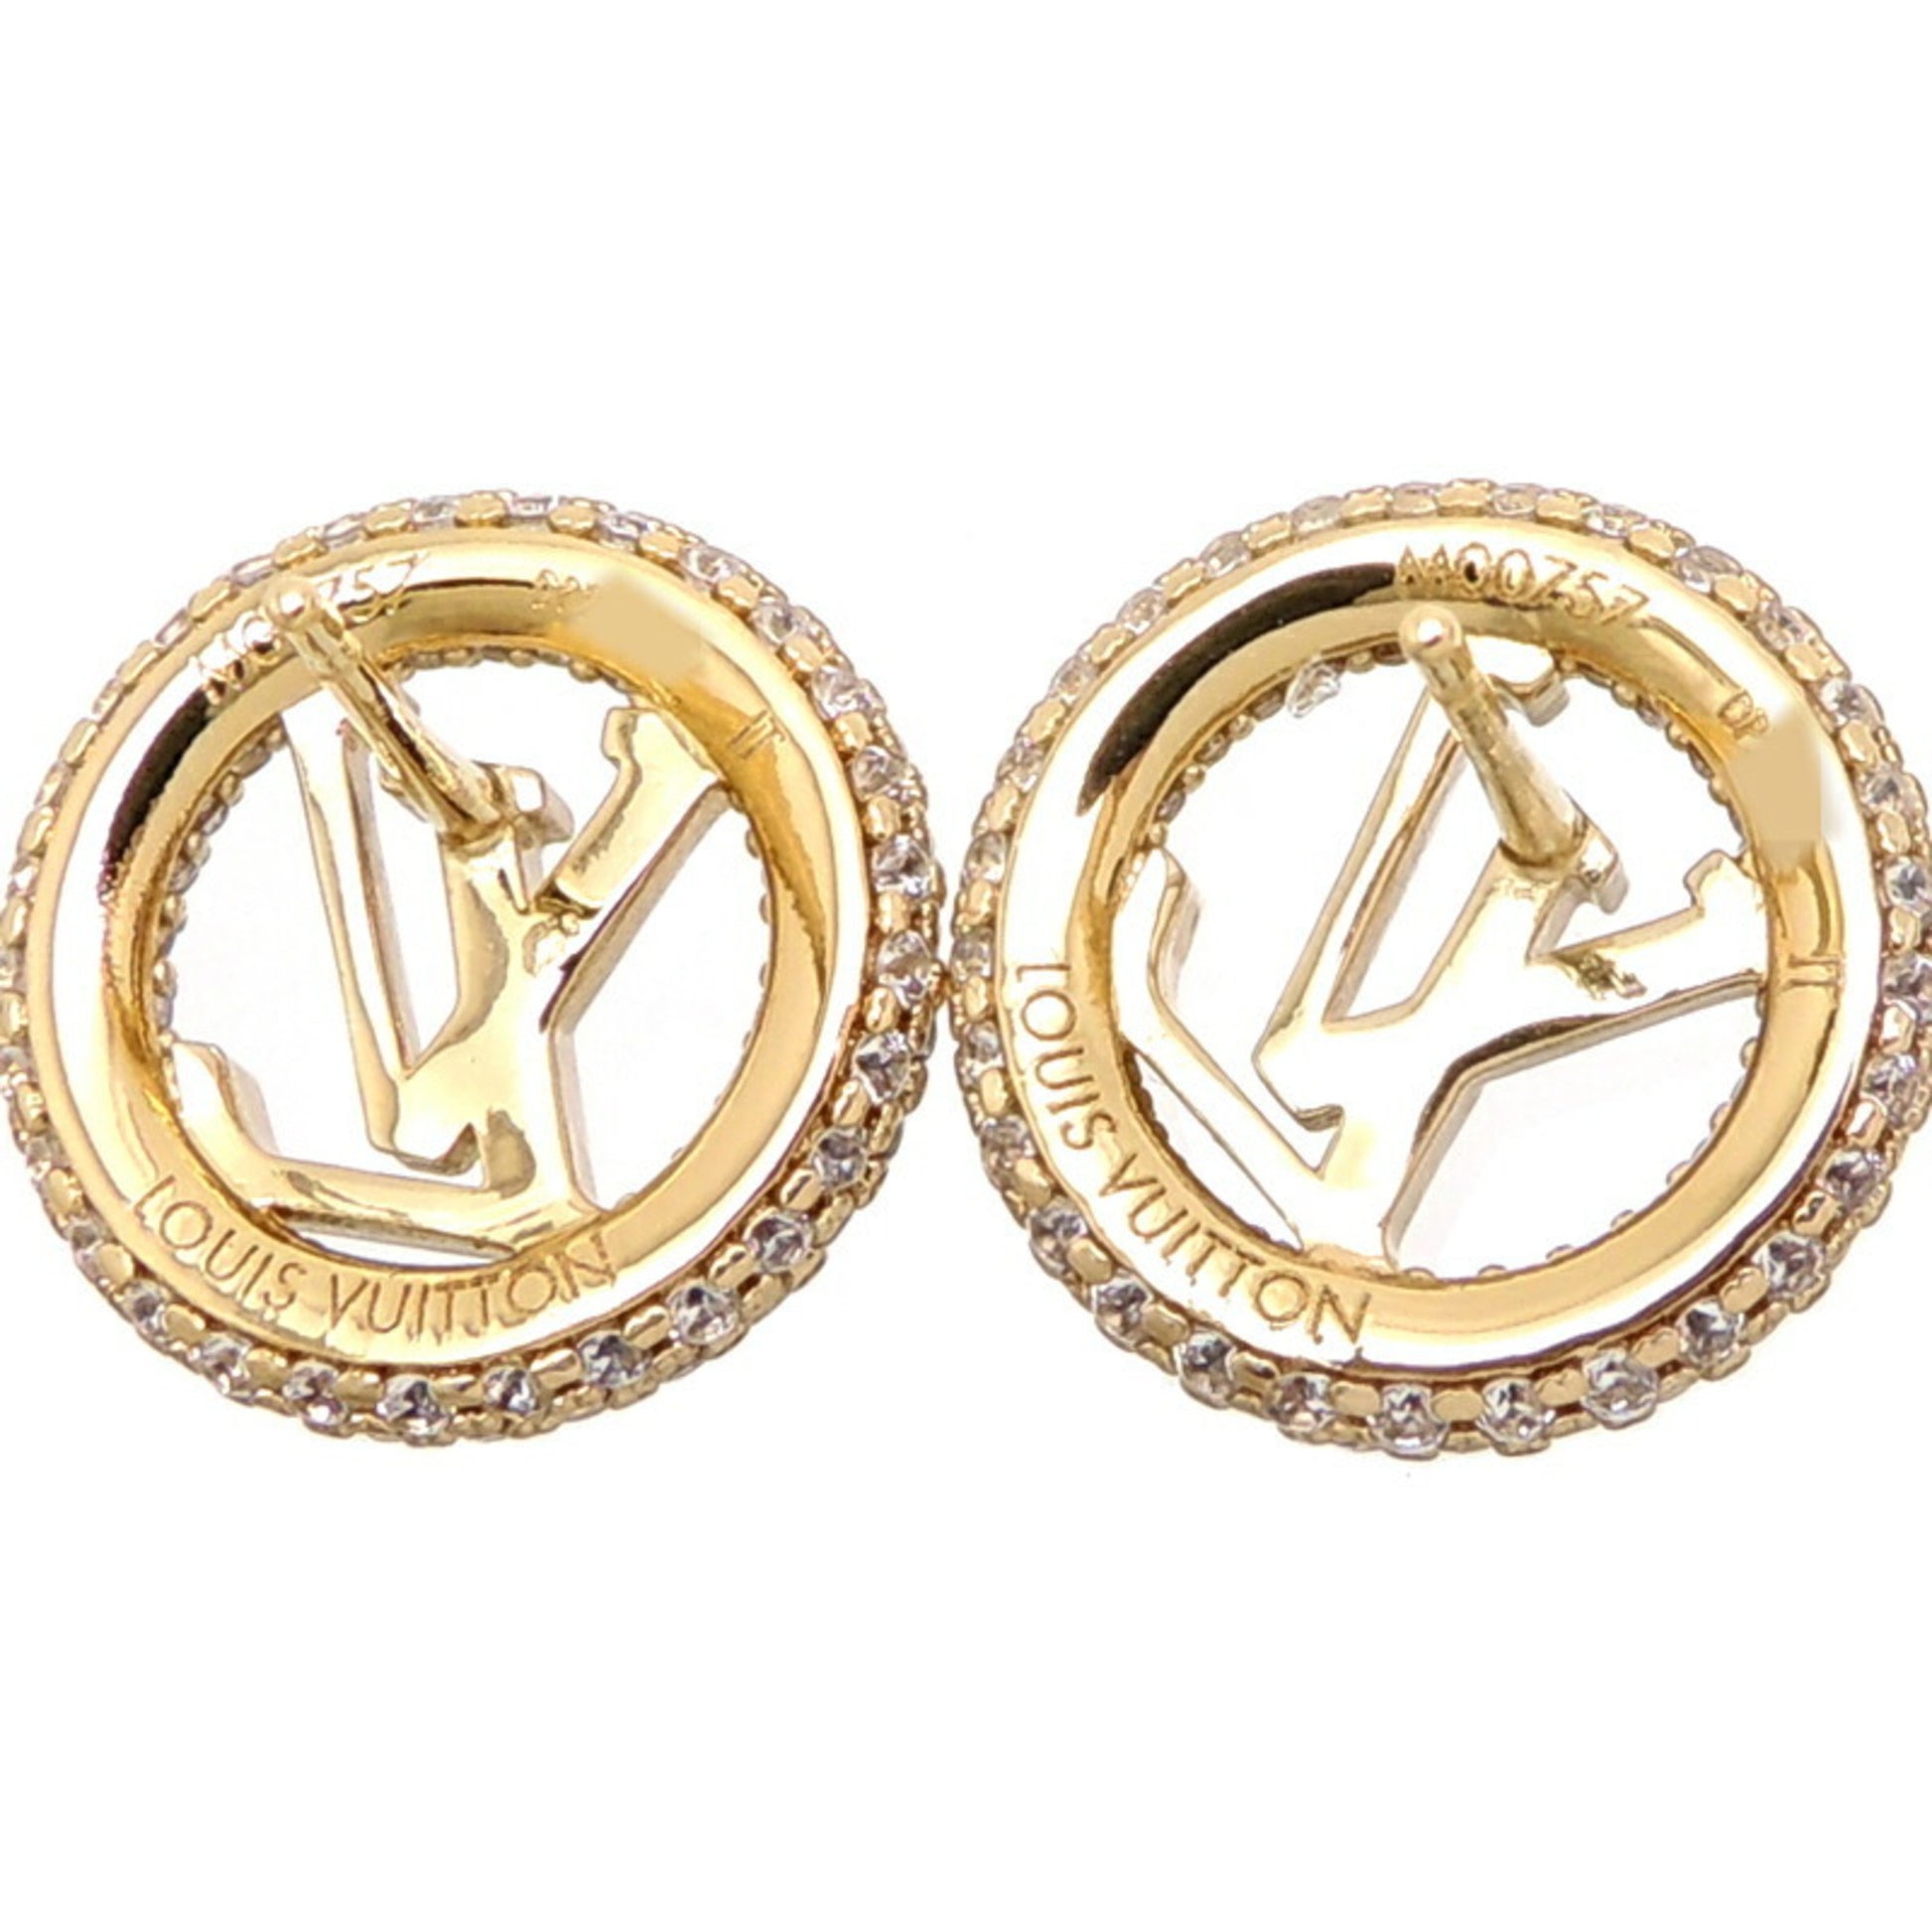 Louis Vuitton Louise By Night Earrings Gold in Gold Metal - US